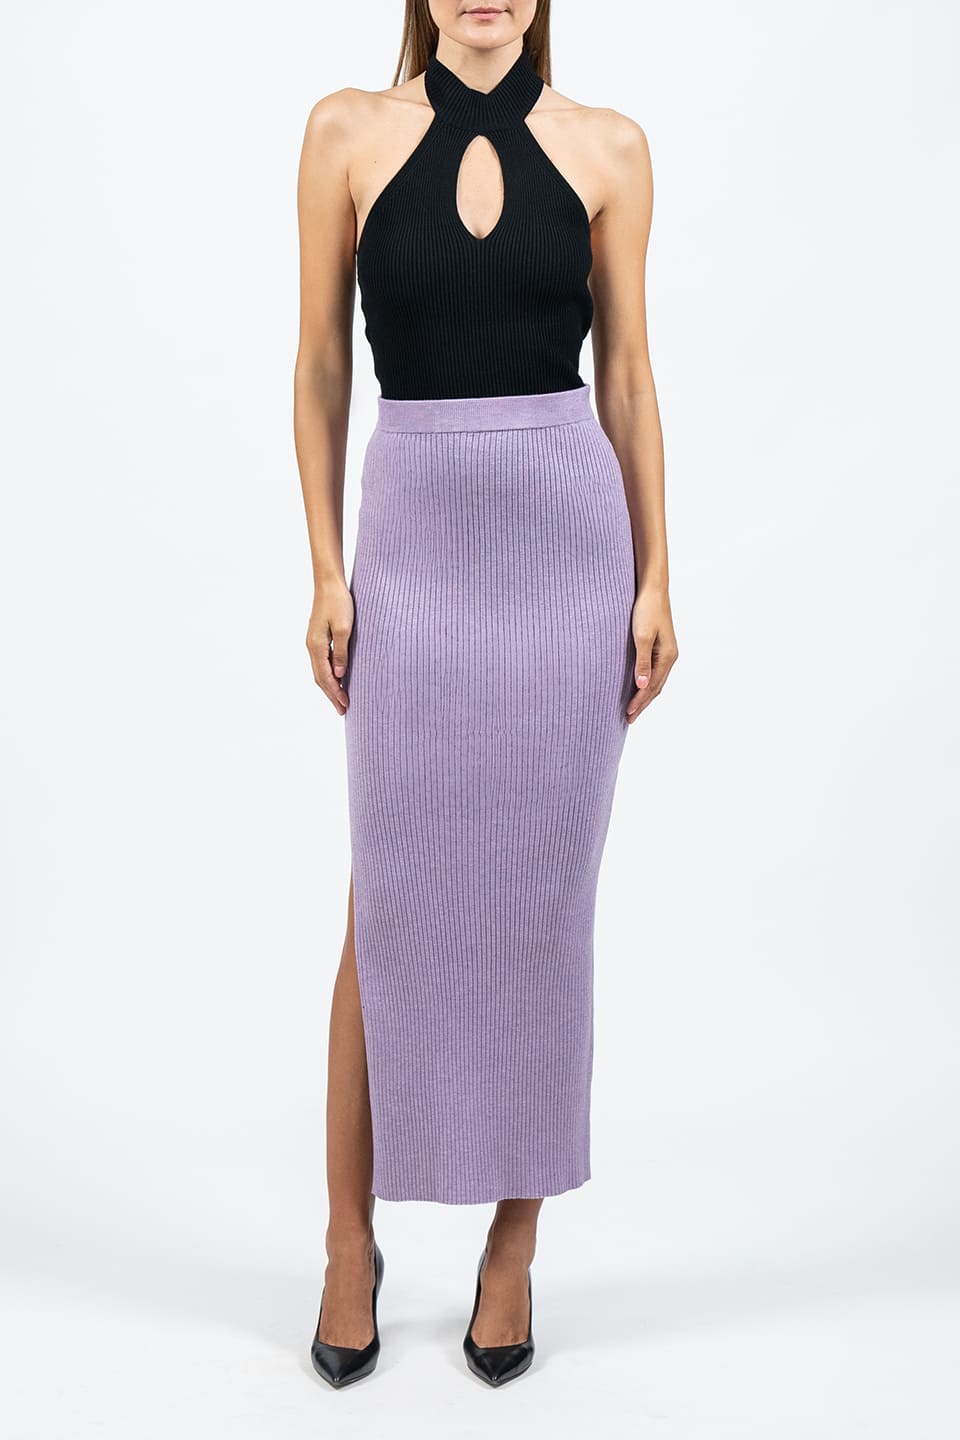 Designer Violet Skirts, shop online with free delivery in UAE. Product gallery 6